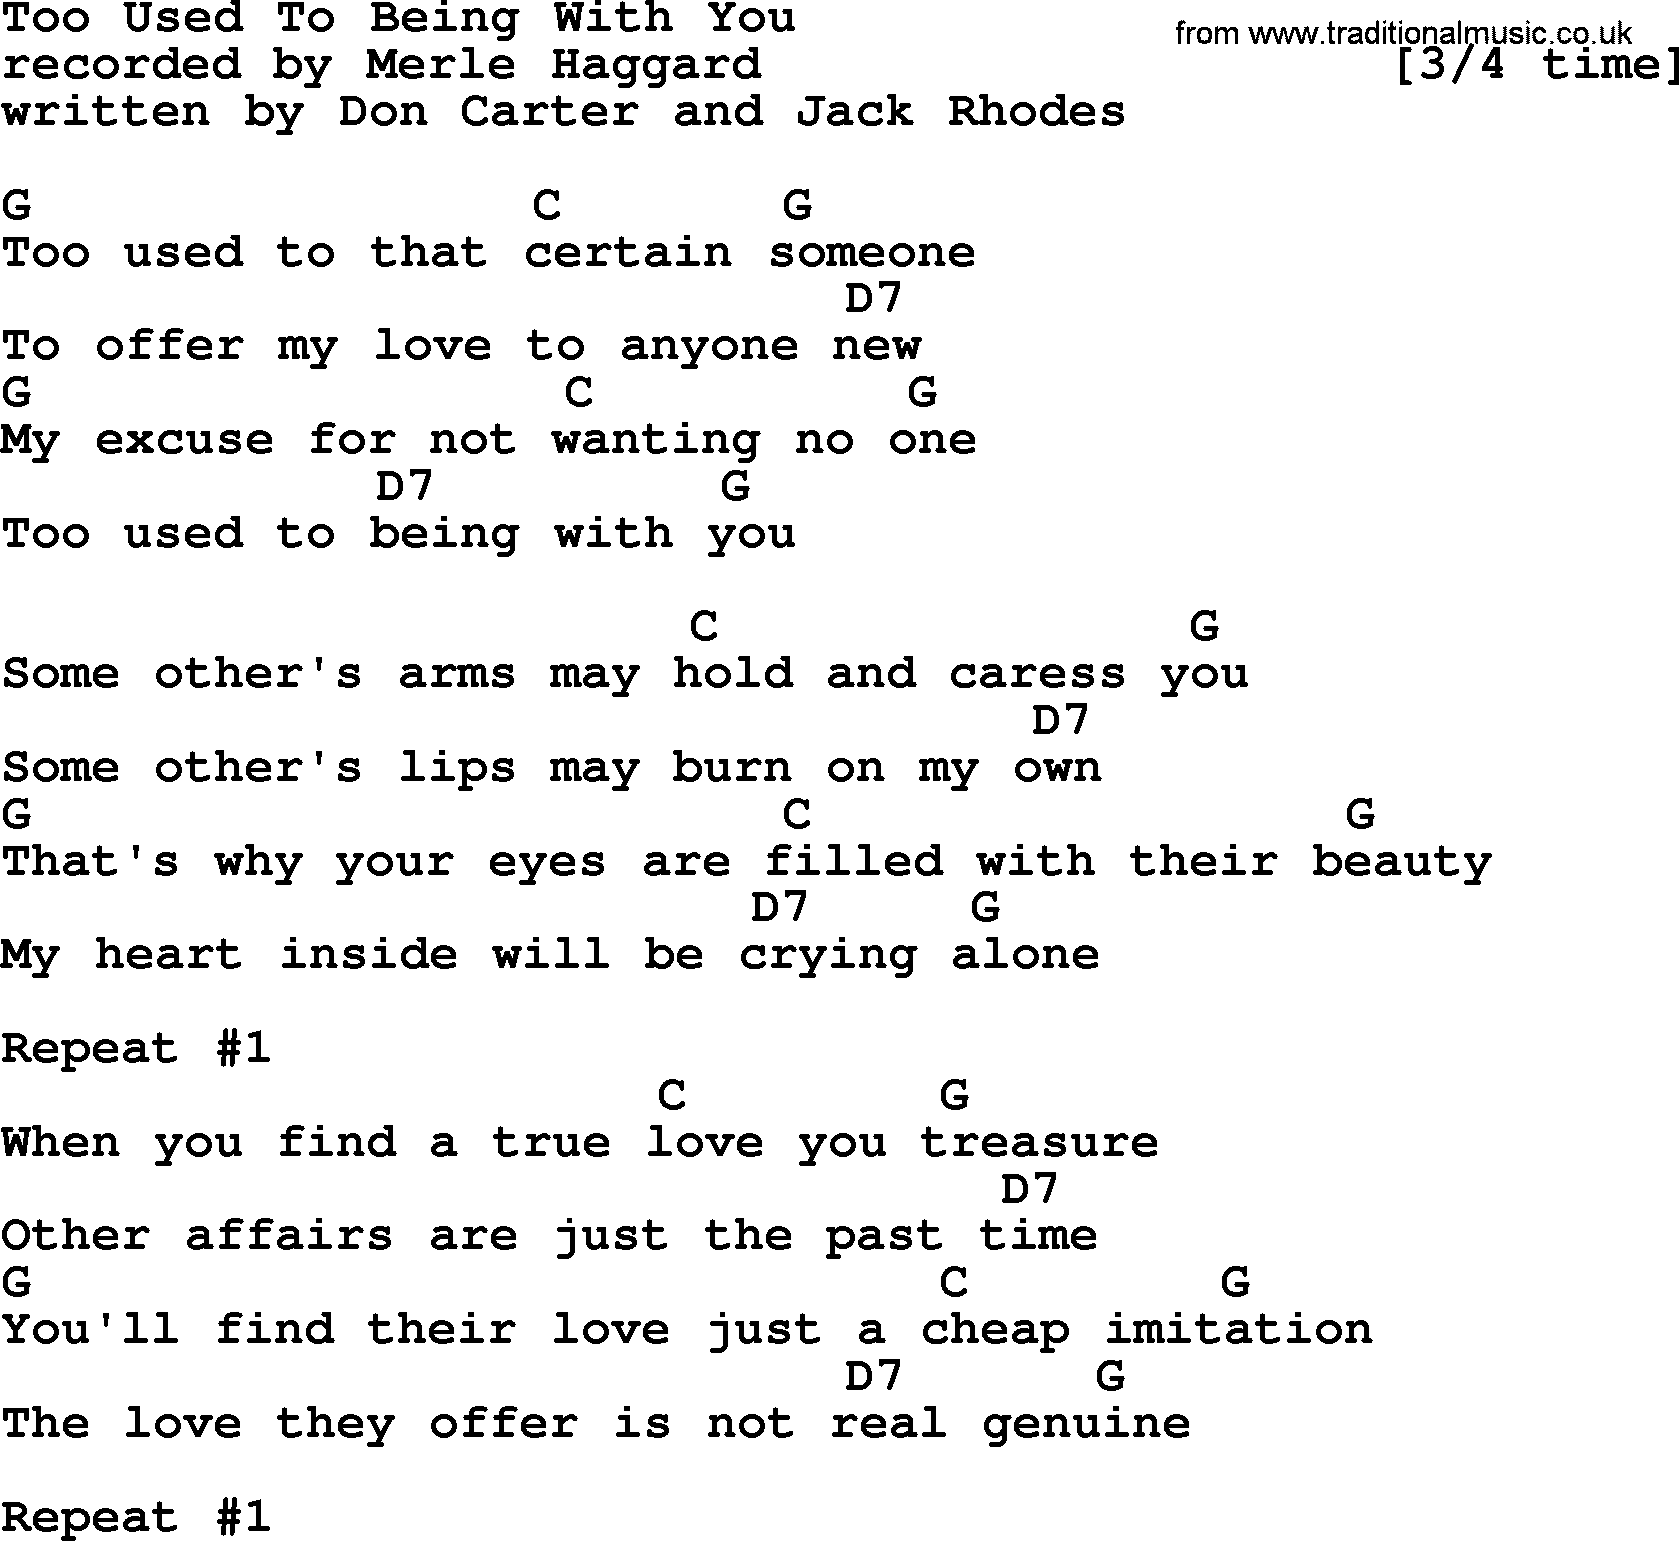 Merle Haggard song: Too Used To Being With You, lyrics and chords